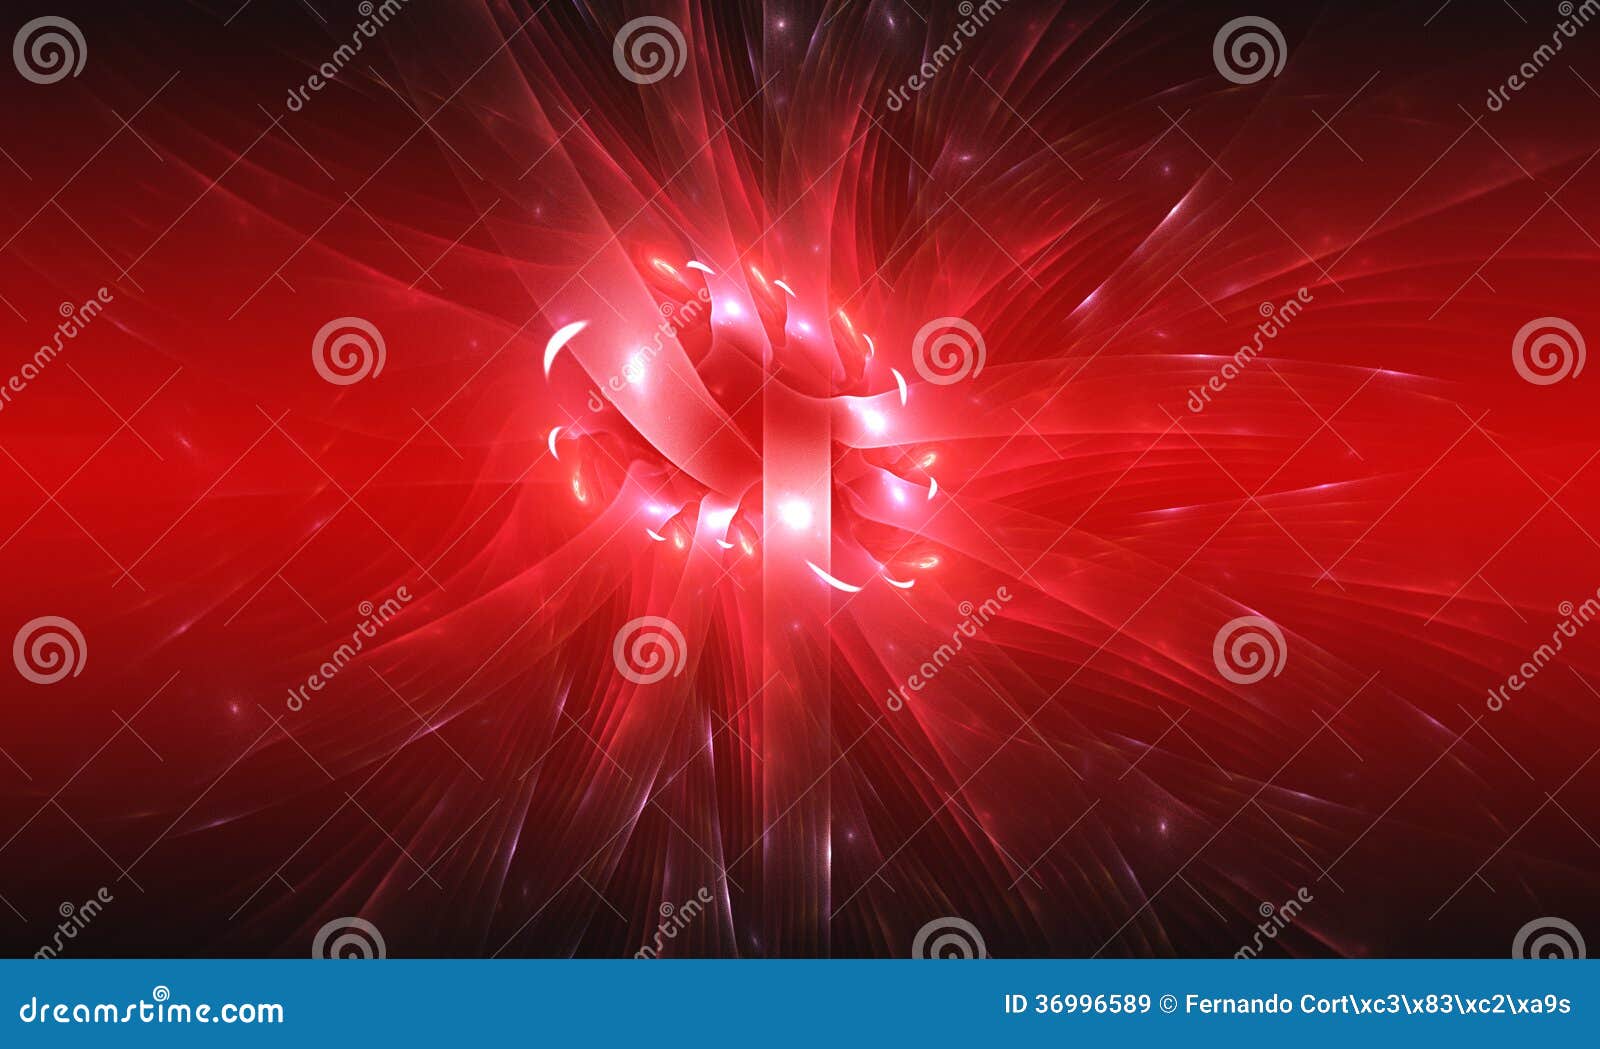 Red Background. Abstract Design. Red and White. Stock Illustration